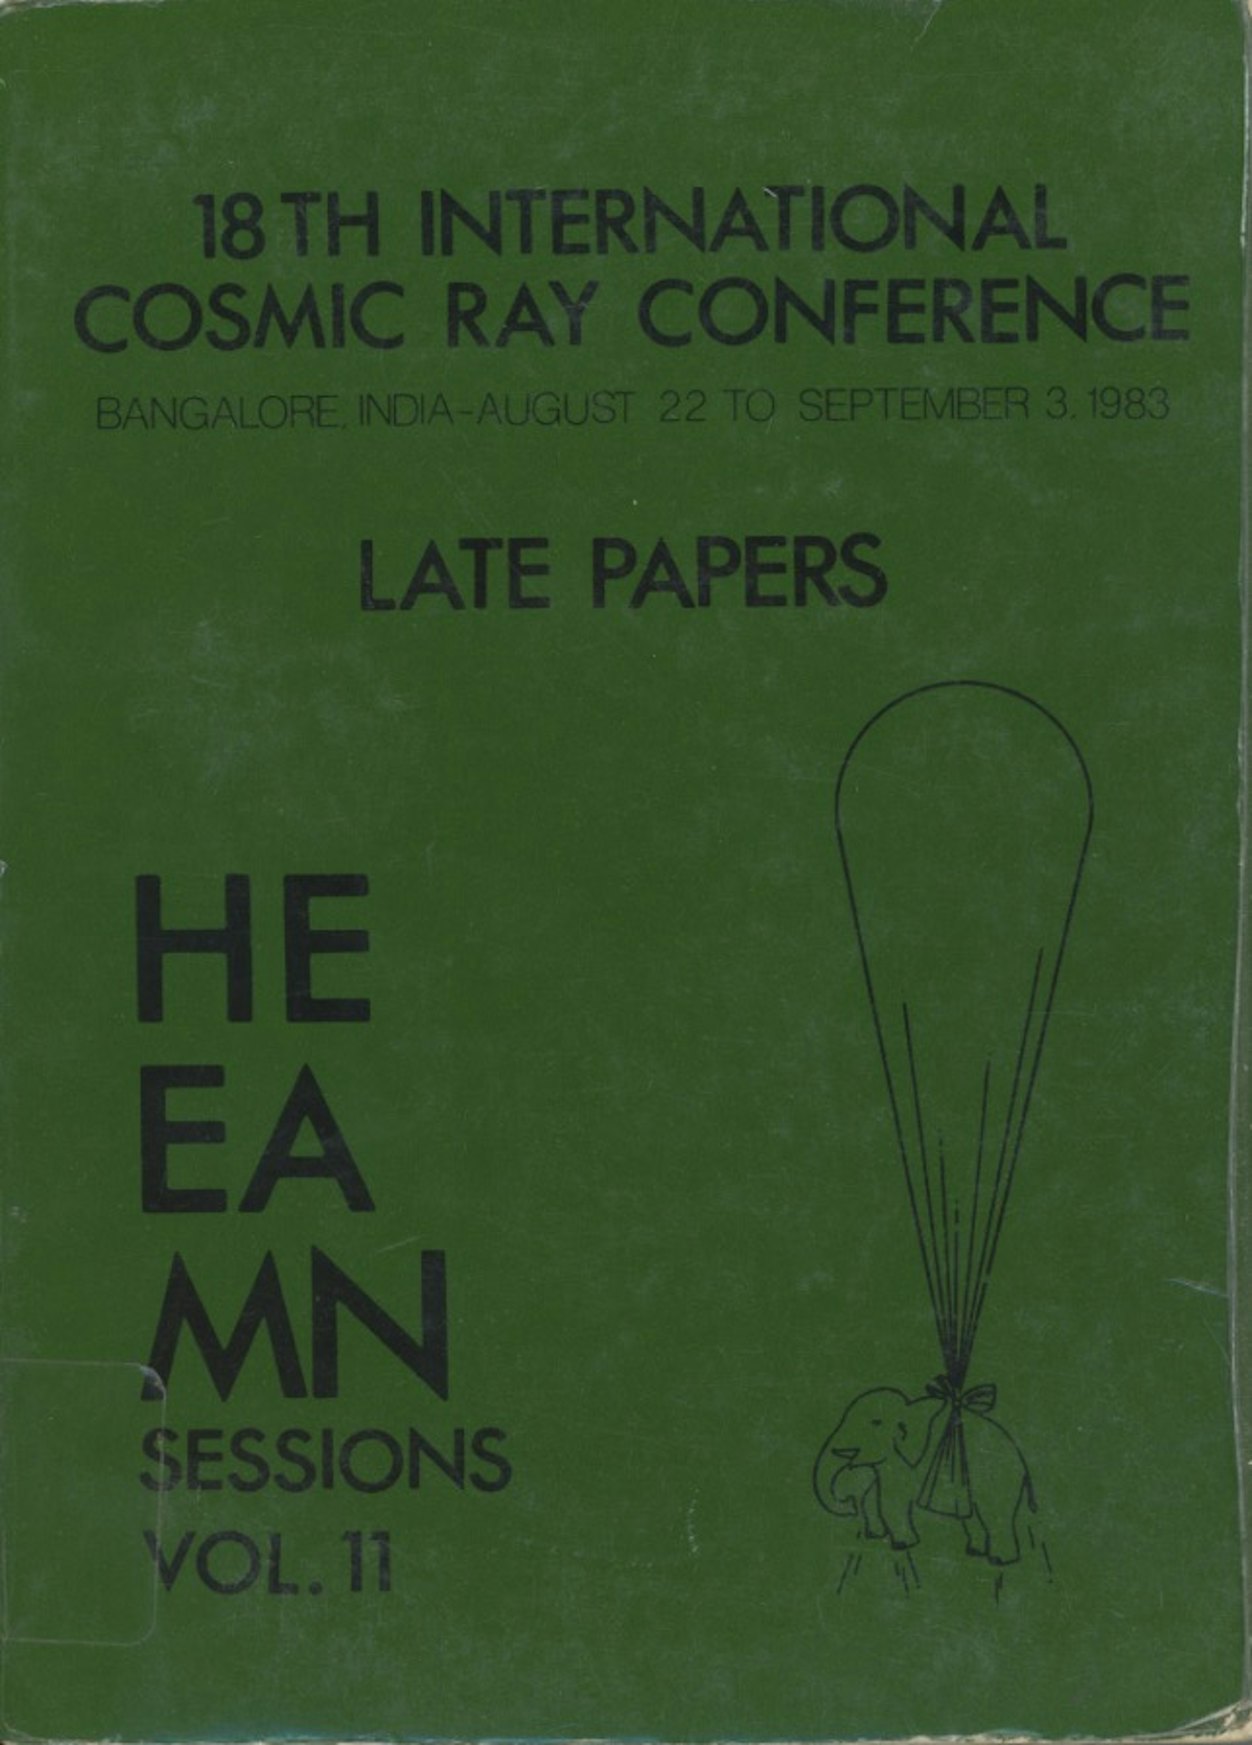 18th International Cosmic Ray Conference Late Papers